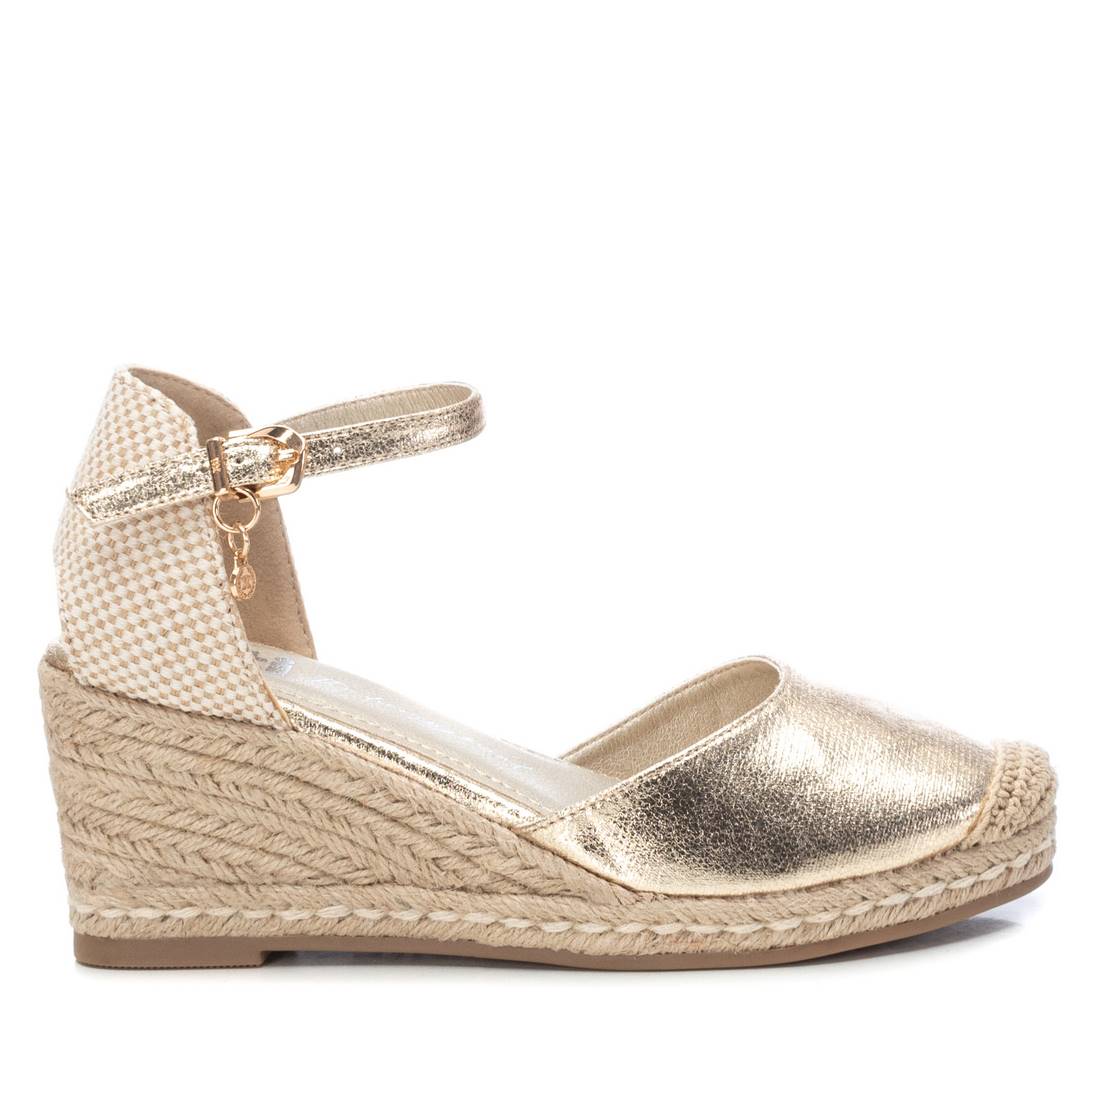 Front view of XTI Metallic Gold Vegan Espadrille Wedges, perfect for adding sparkle to your steps.